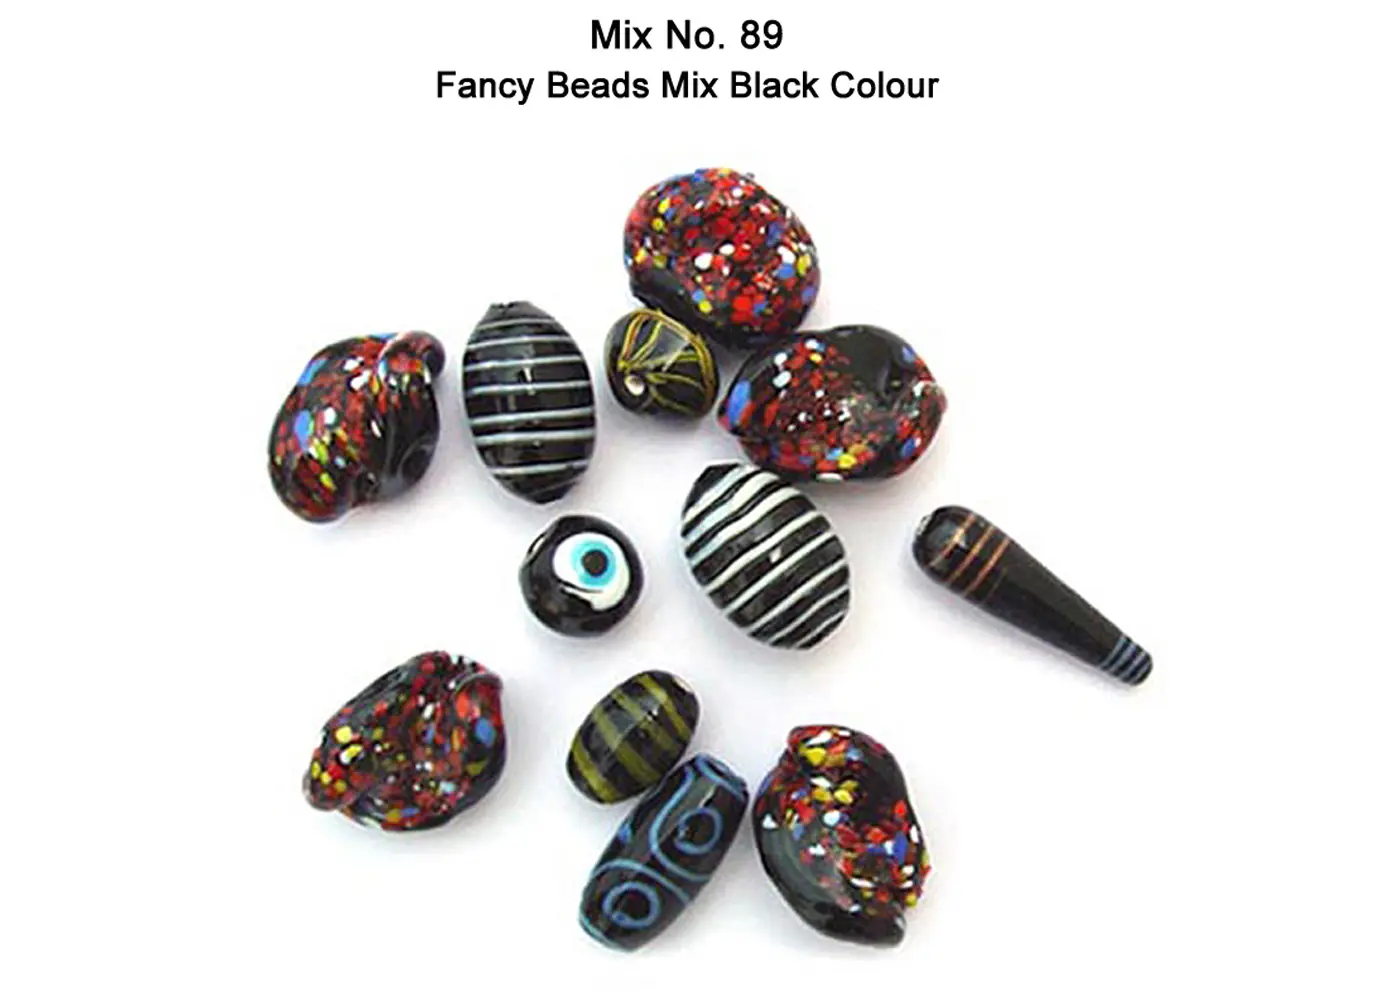 Fancy Bead mix in Black color